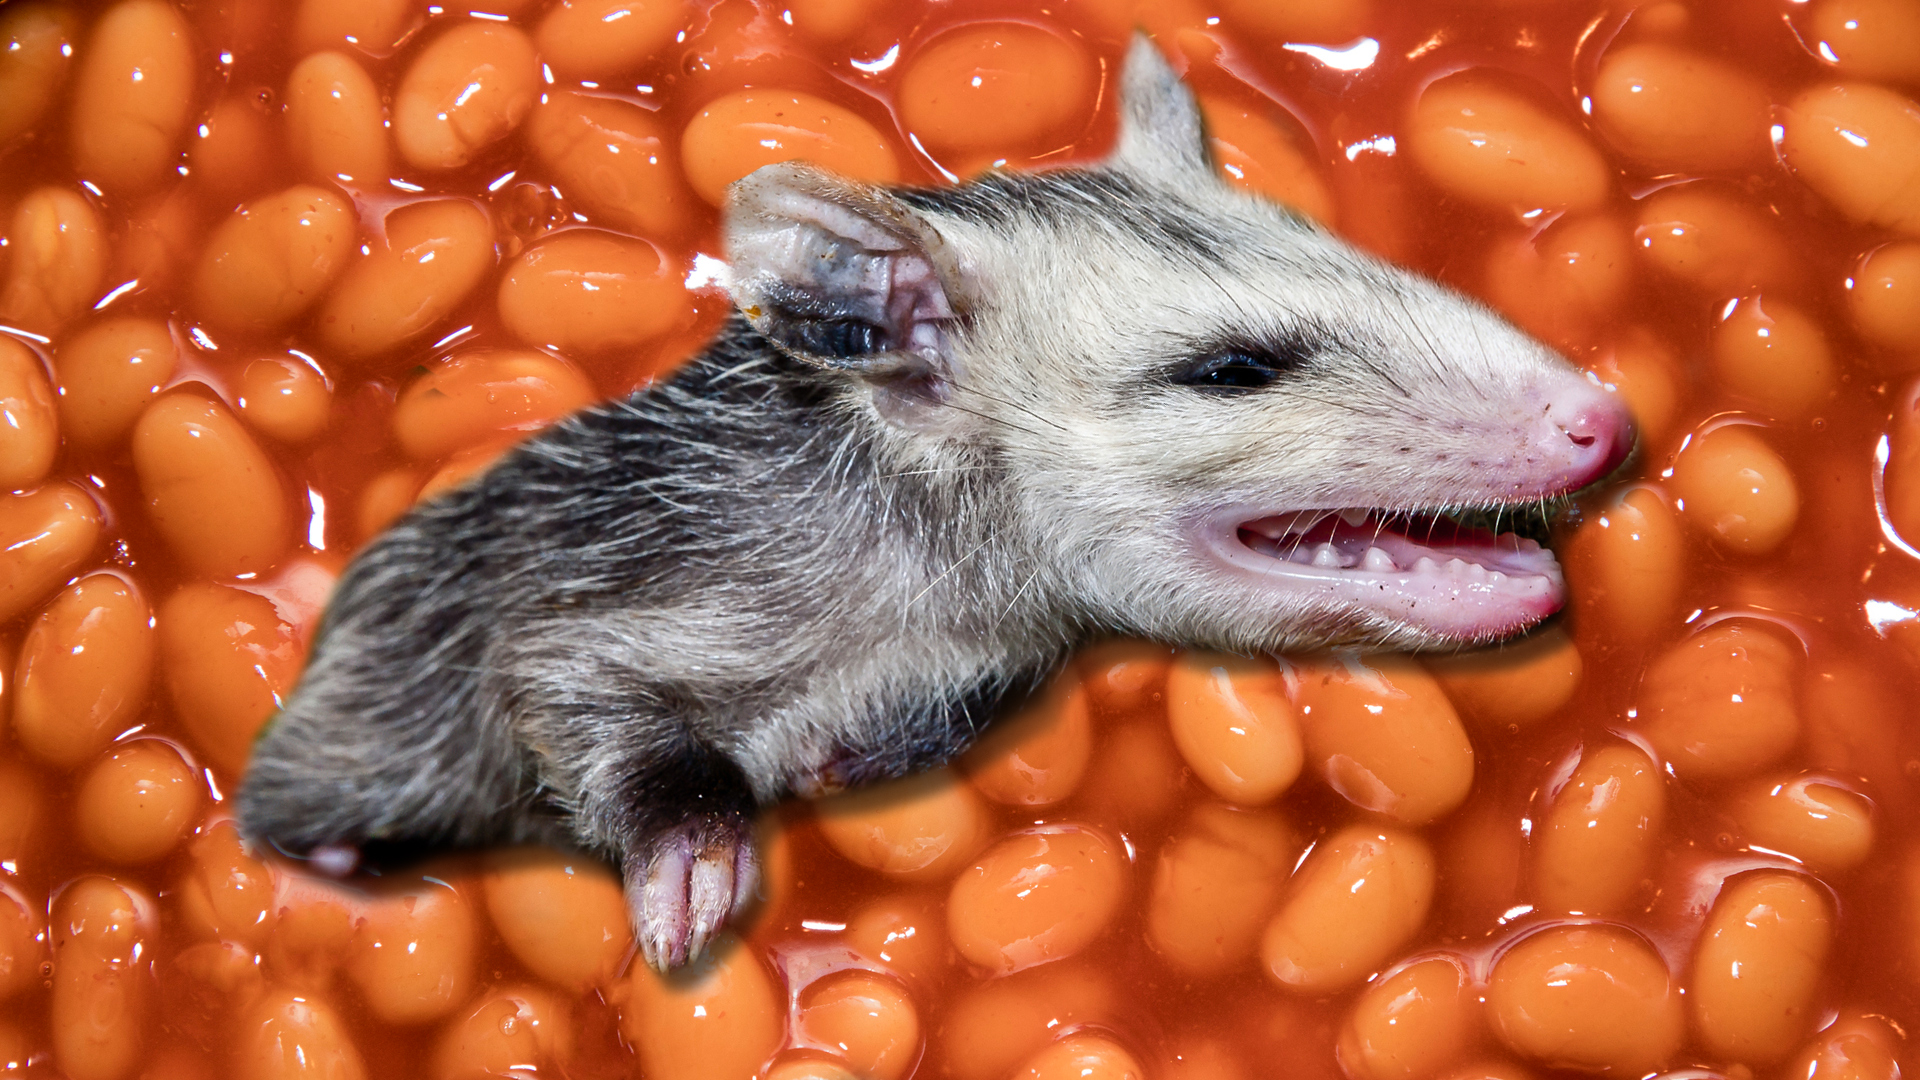 An opossum in a cold bucket of beans